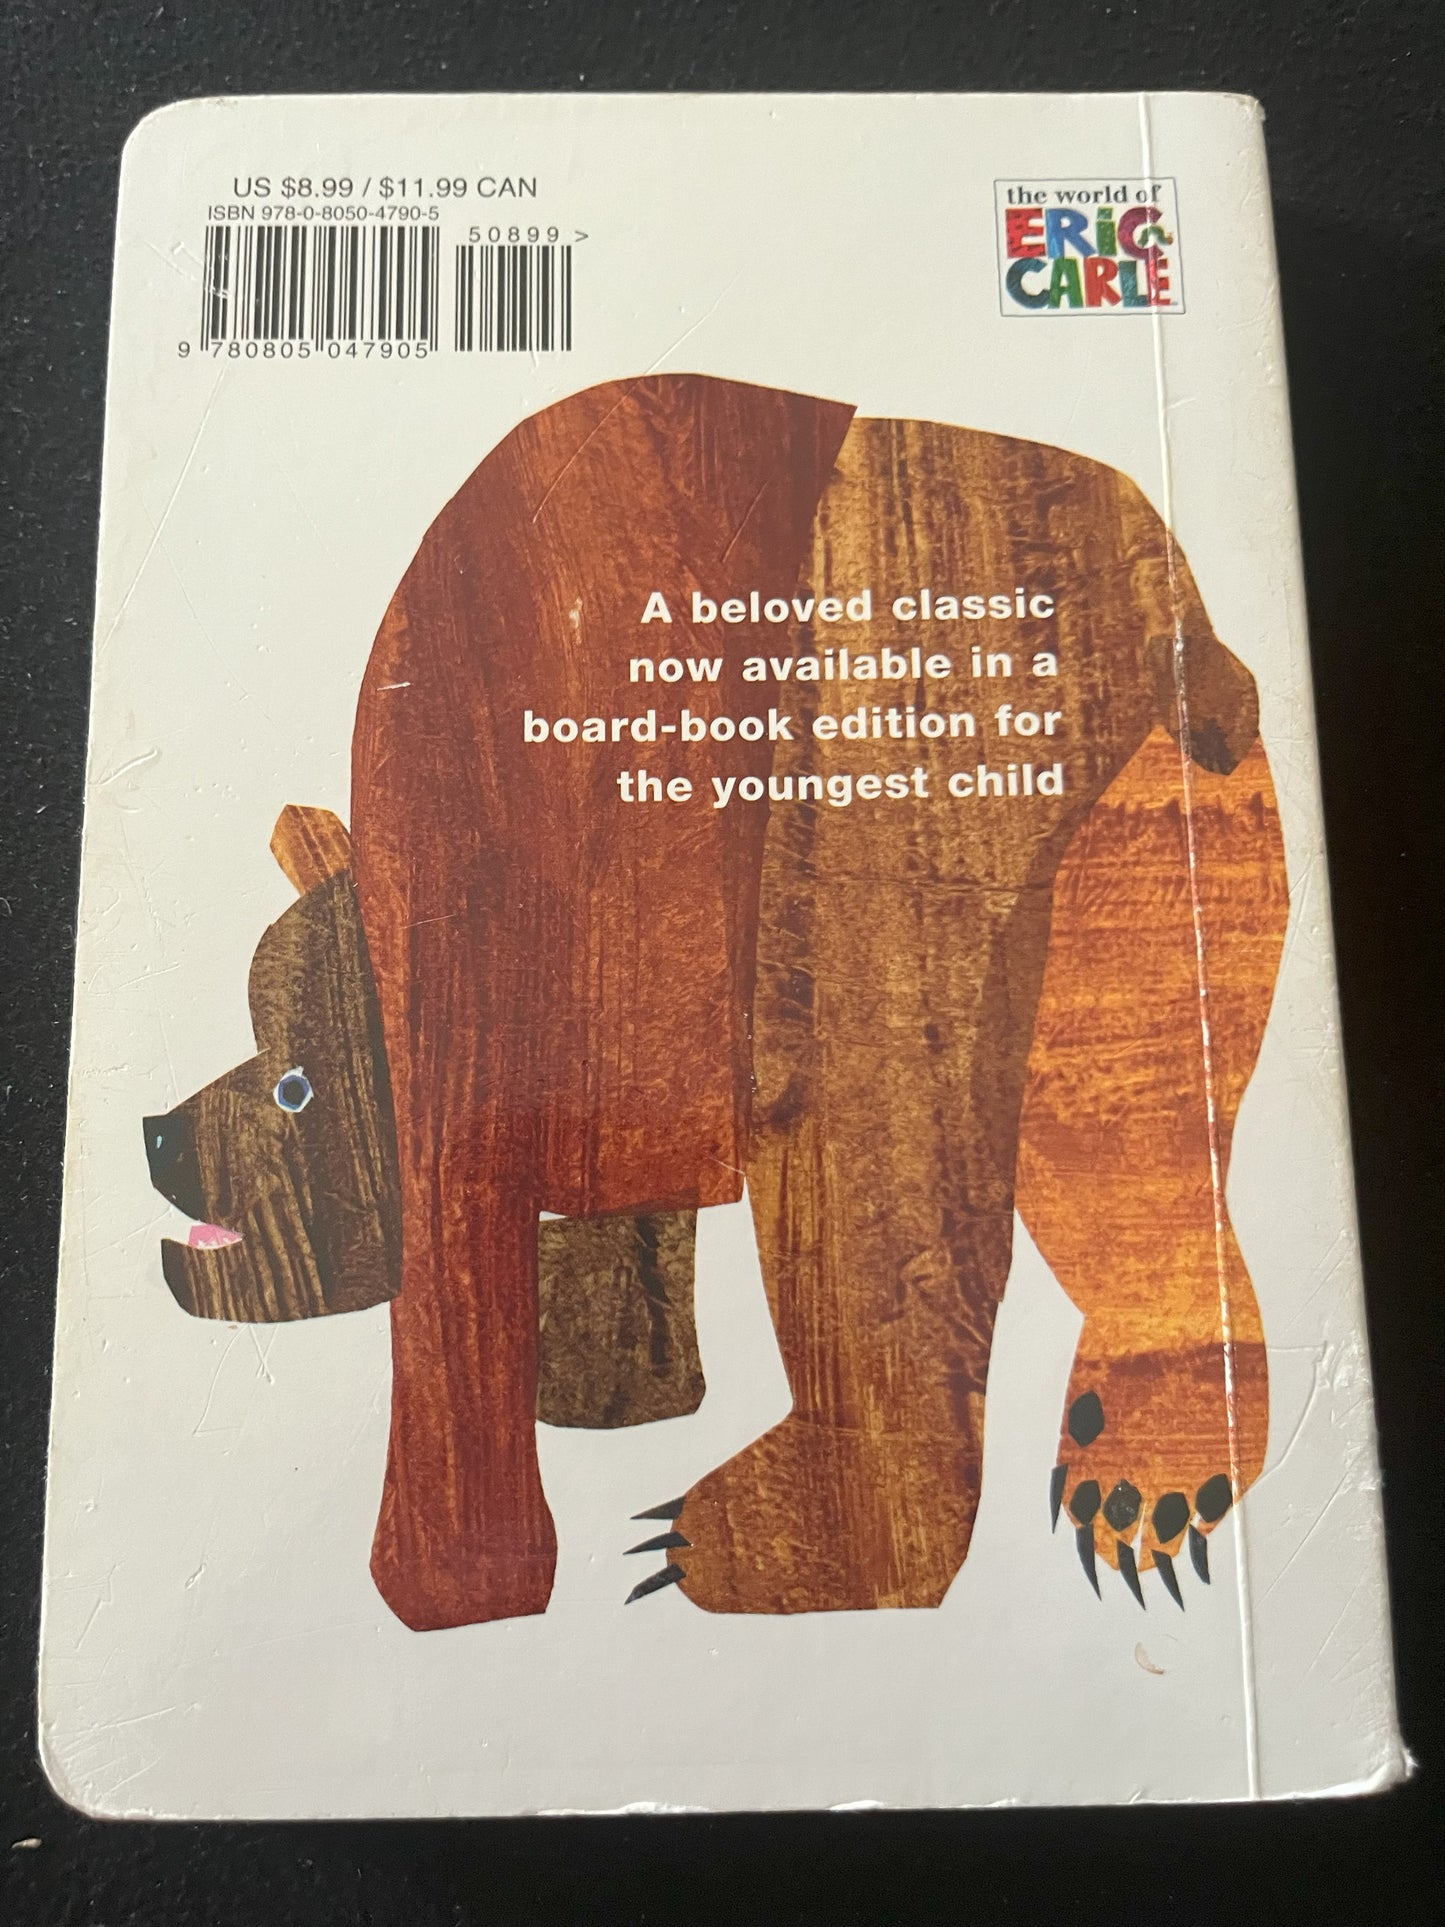 BROWN BEAR, BROWN BEAR, WHAT DO YOU SEE? by Bill Martin and Eric Carle